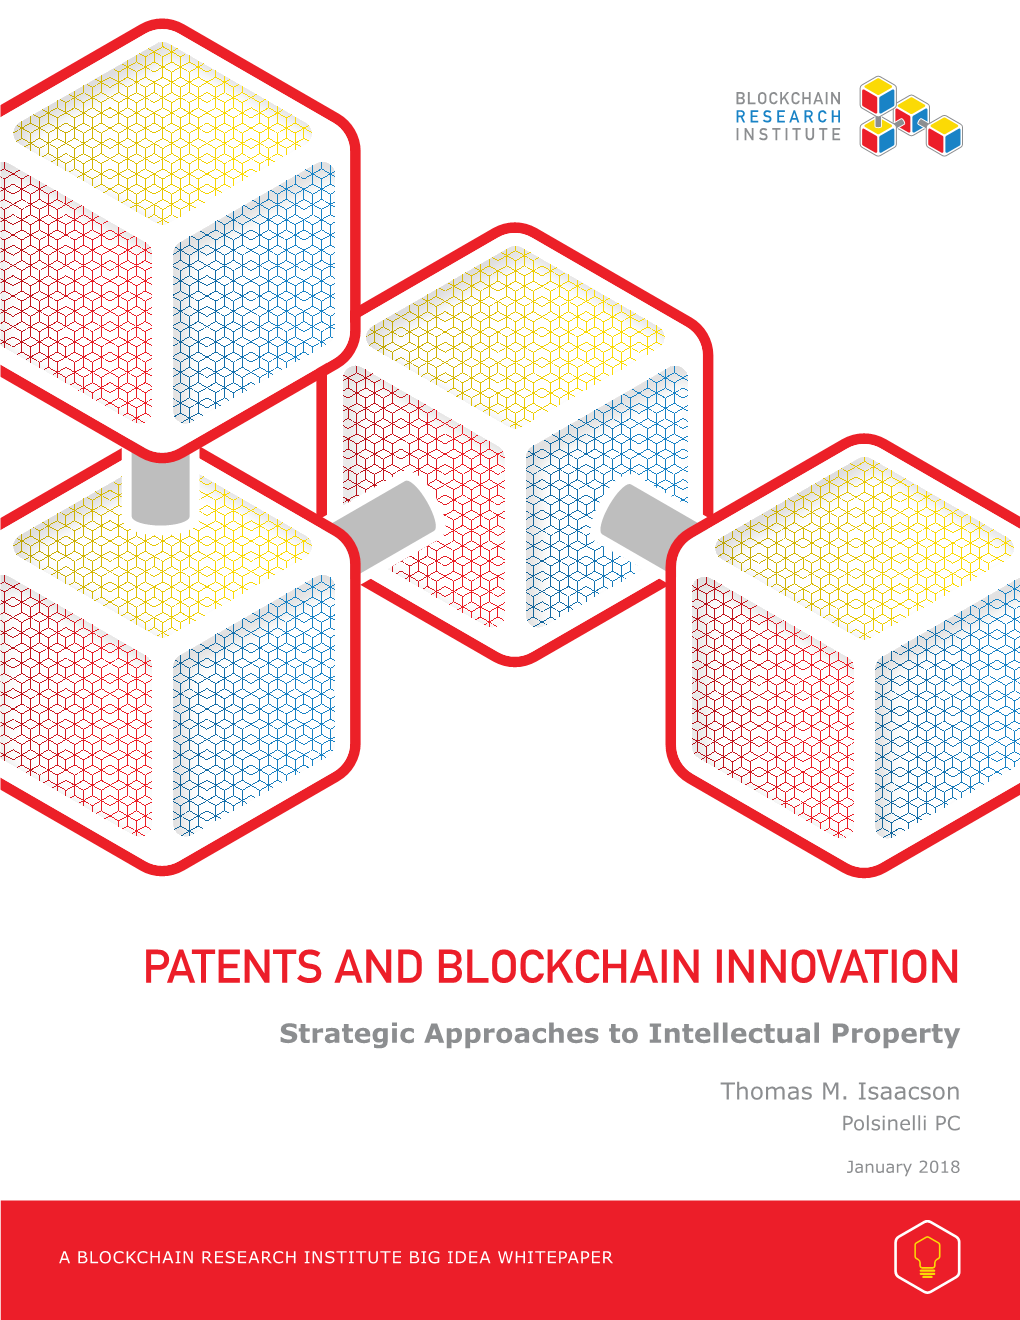 Patents and Blockchain Innovation: Strategic Approaches to Intellectual Property,” Foreword by Don Tapscott, Blockchain Research Institute, 29 Jan